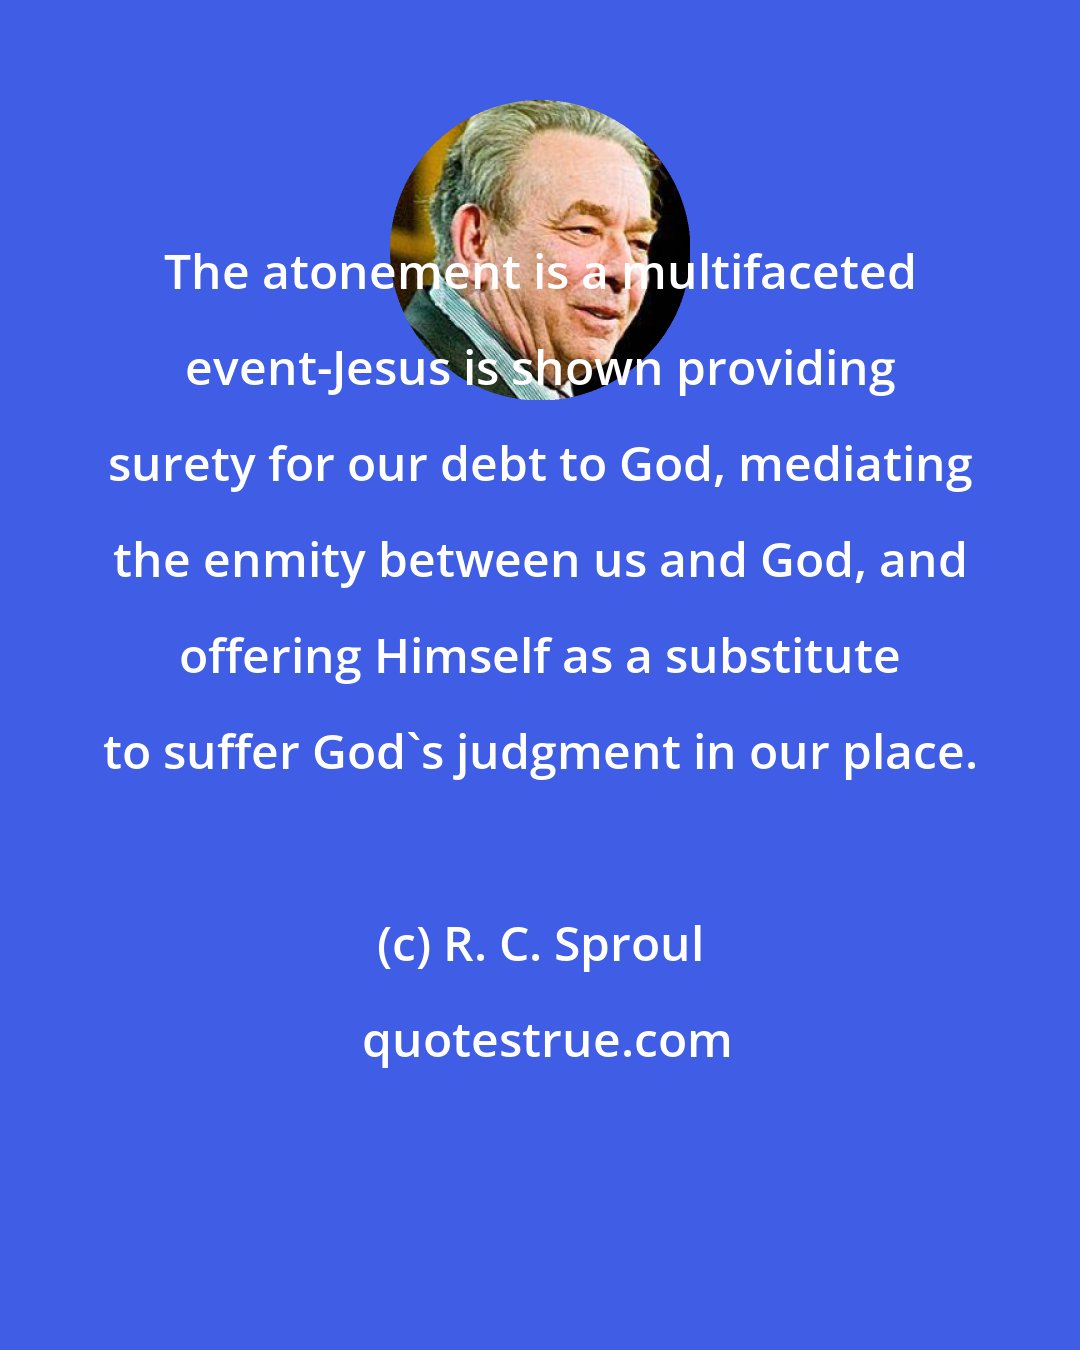 R. C. Sproul: The atonement is a multifaceted event-Jesus is shown providing surety for our debt to God, mediating the enmity between us and God, and offering Himself as a substitute to suffer God's judgment in our place.